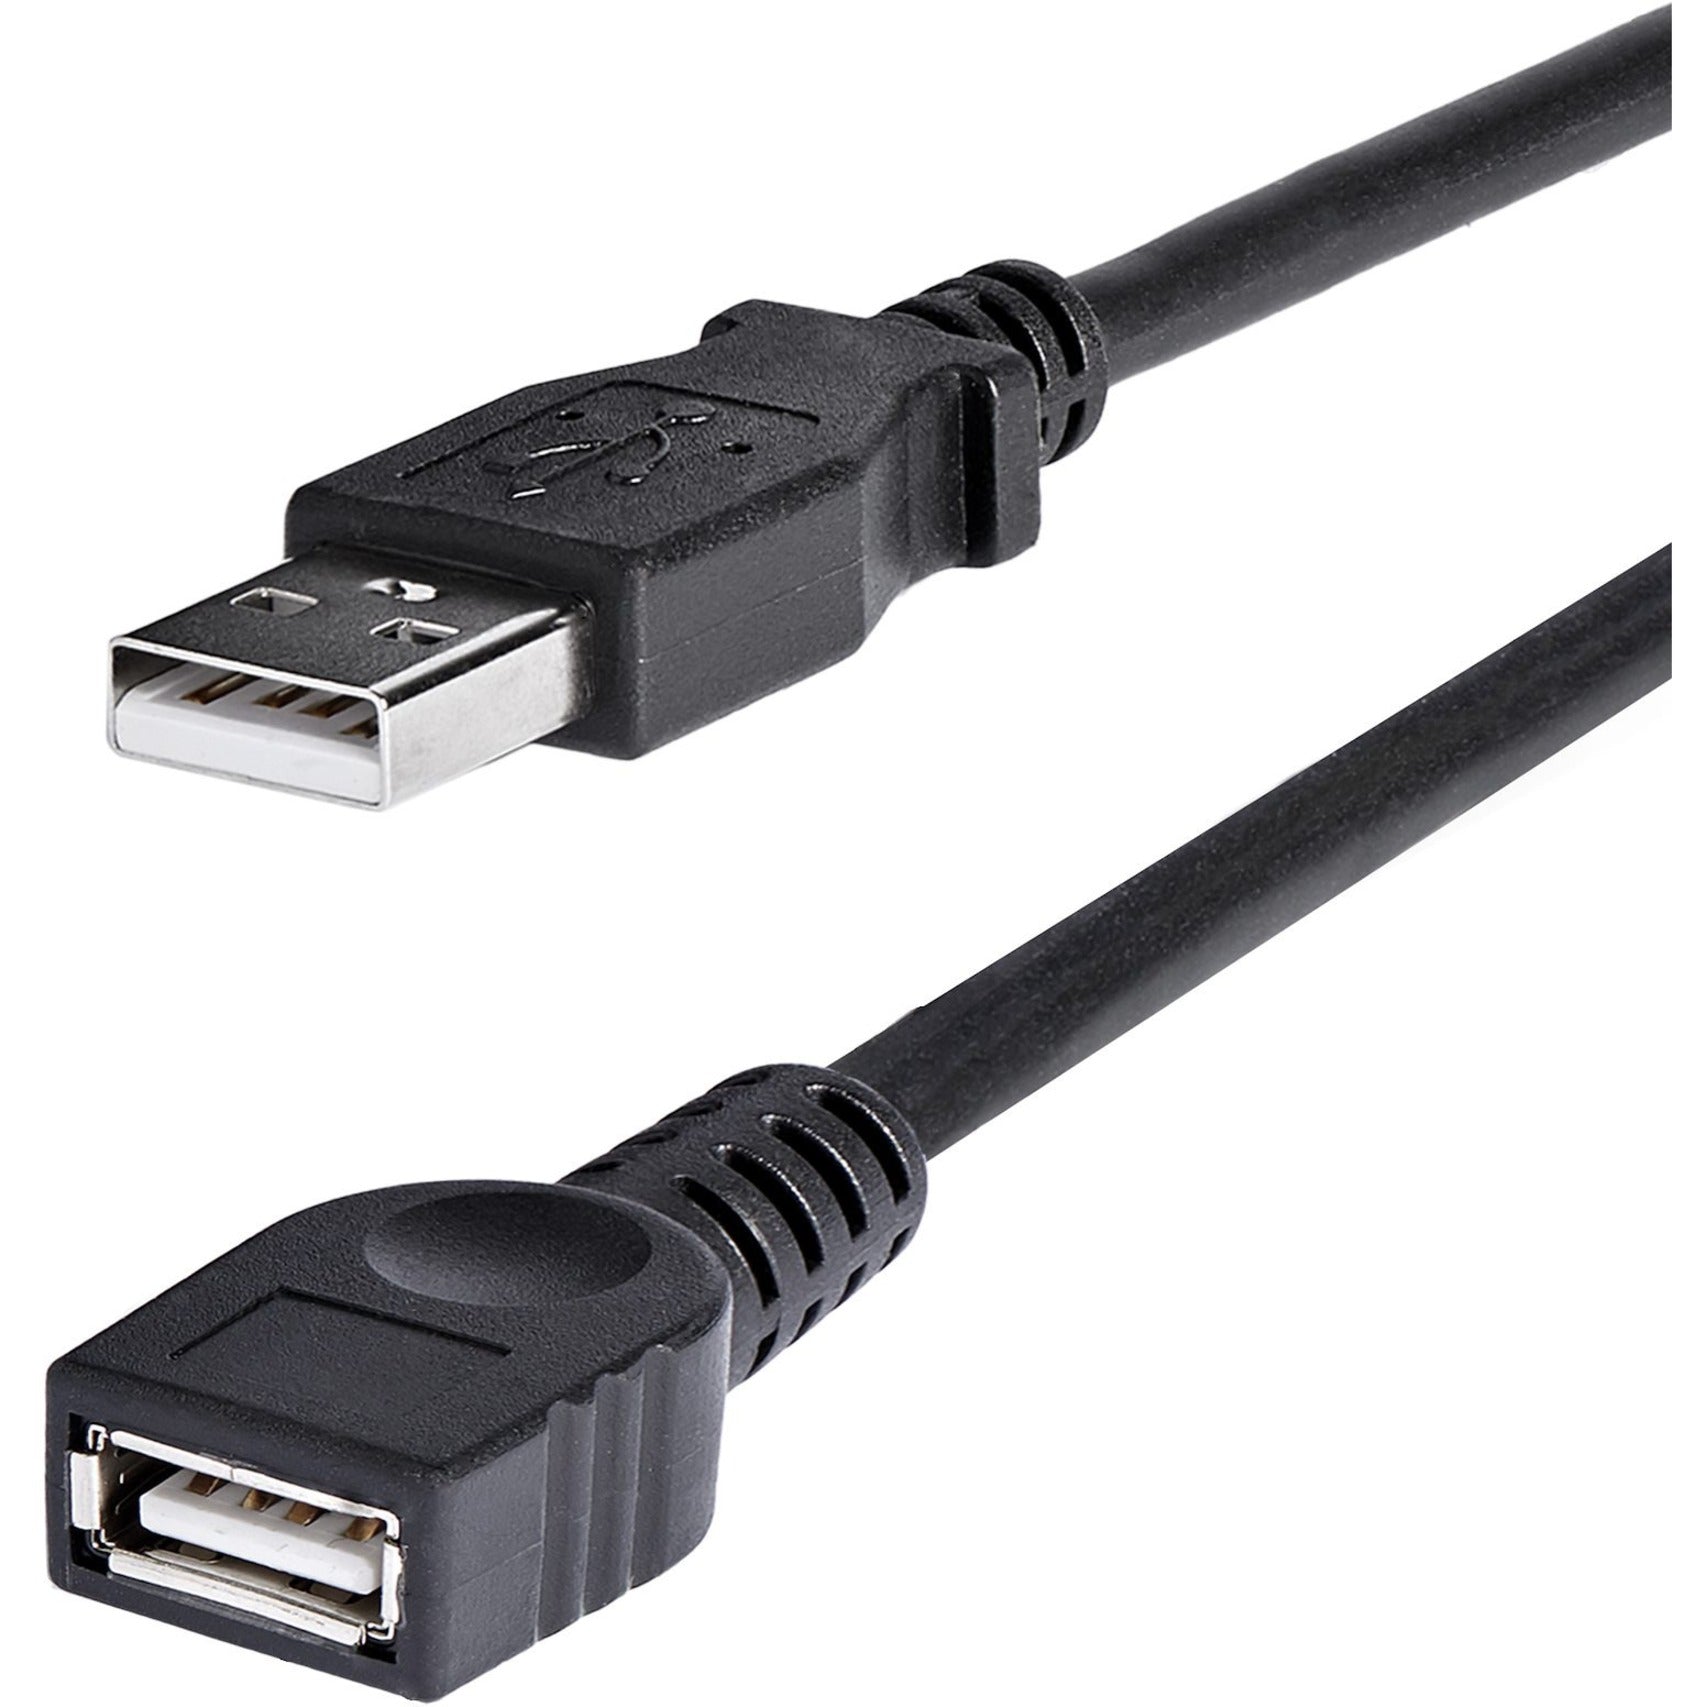 StarTech.com USBEXTAA6BK 6 ft Black USB 2.0 Extension Cable A to A - M/F, Flexible and Molded Data Transfer Cable